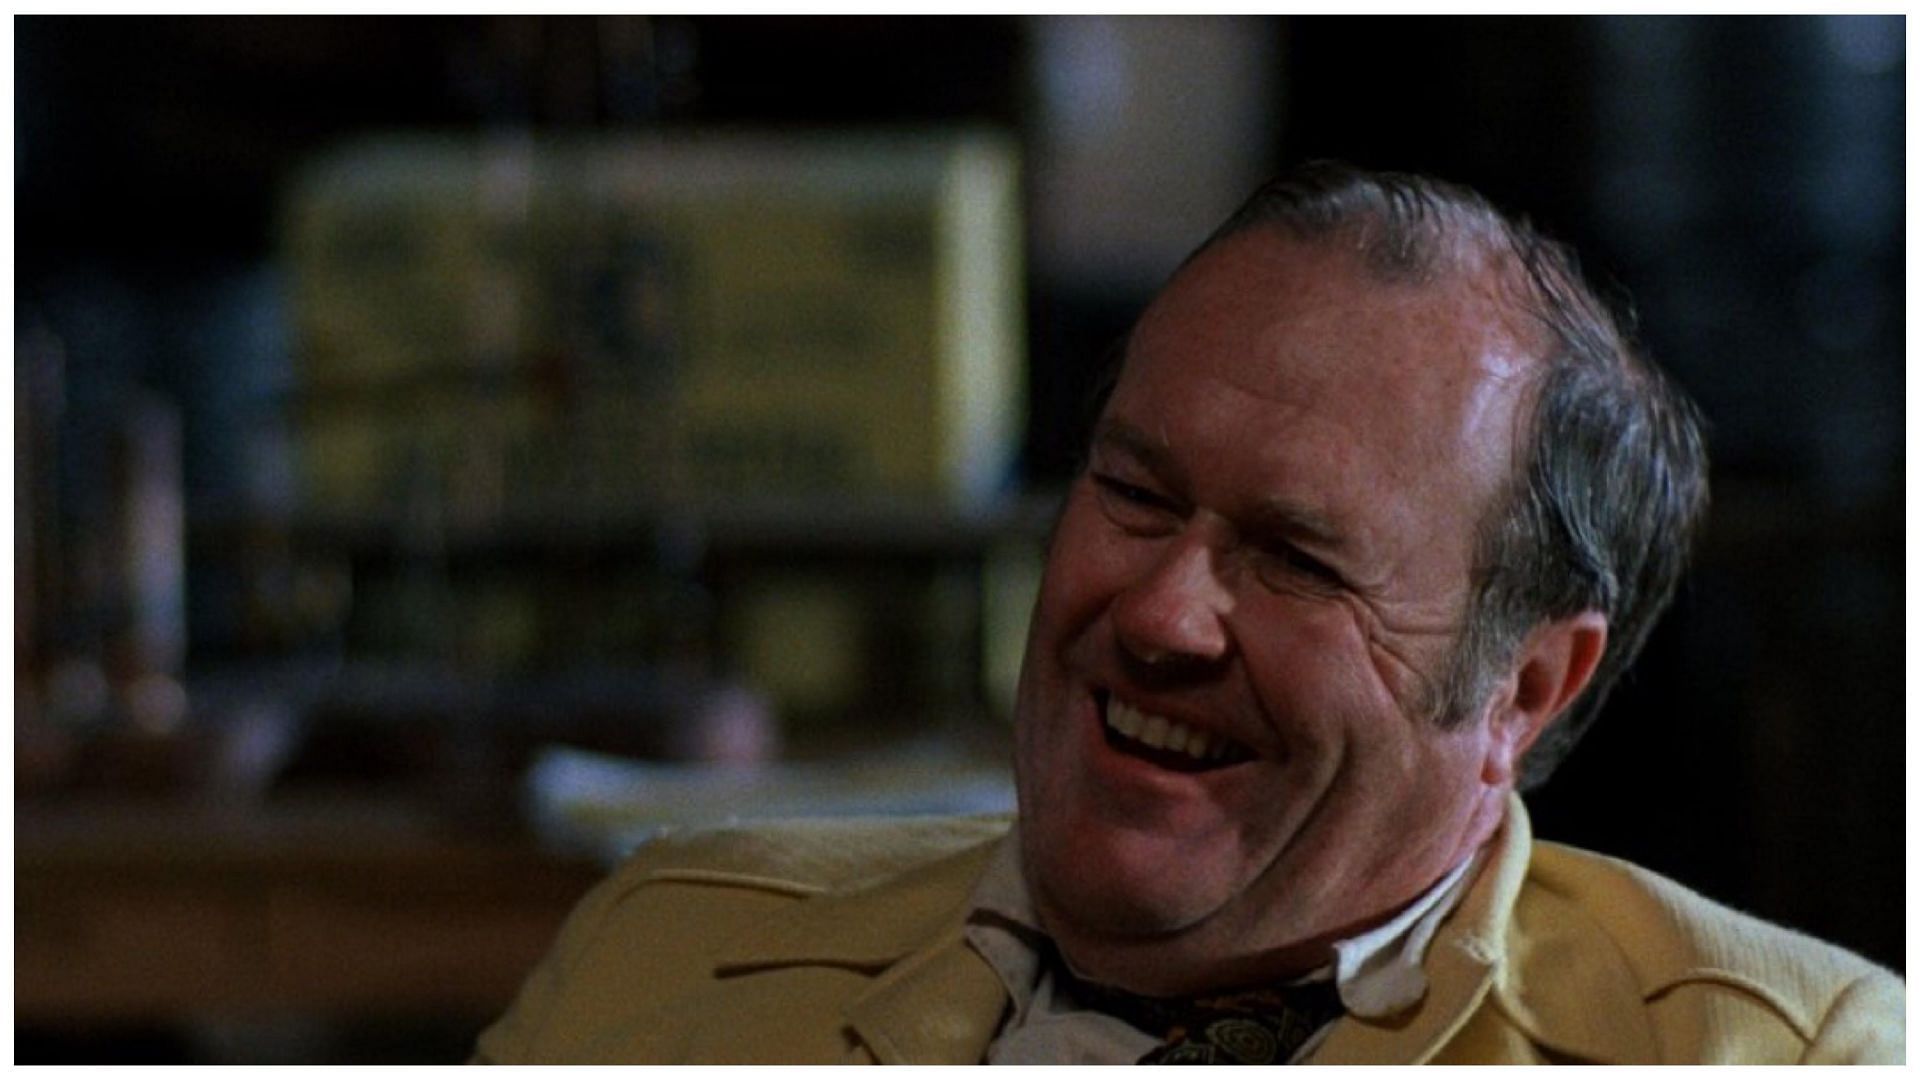 M Emmet Walsh, famed character actor, died at the age of 88 on March 19 (Image via @letterboxd/X)